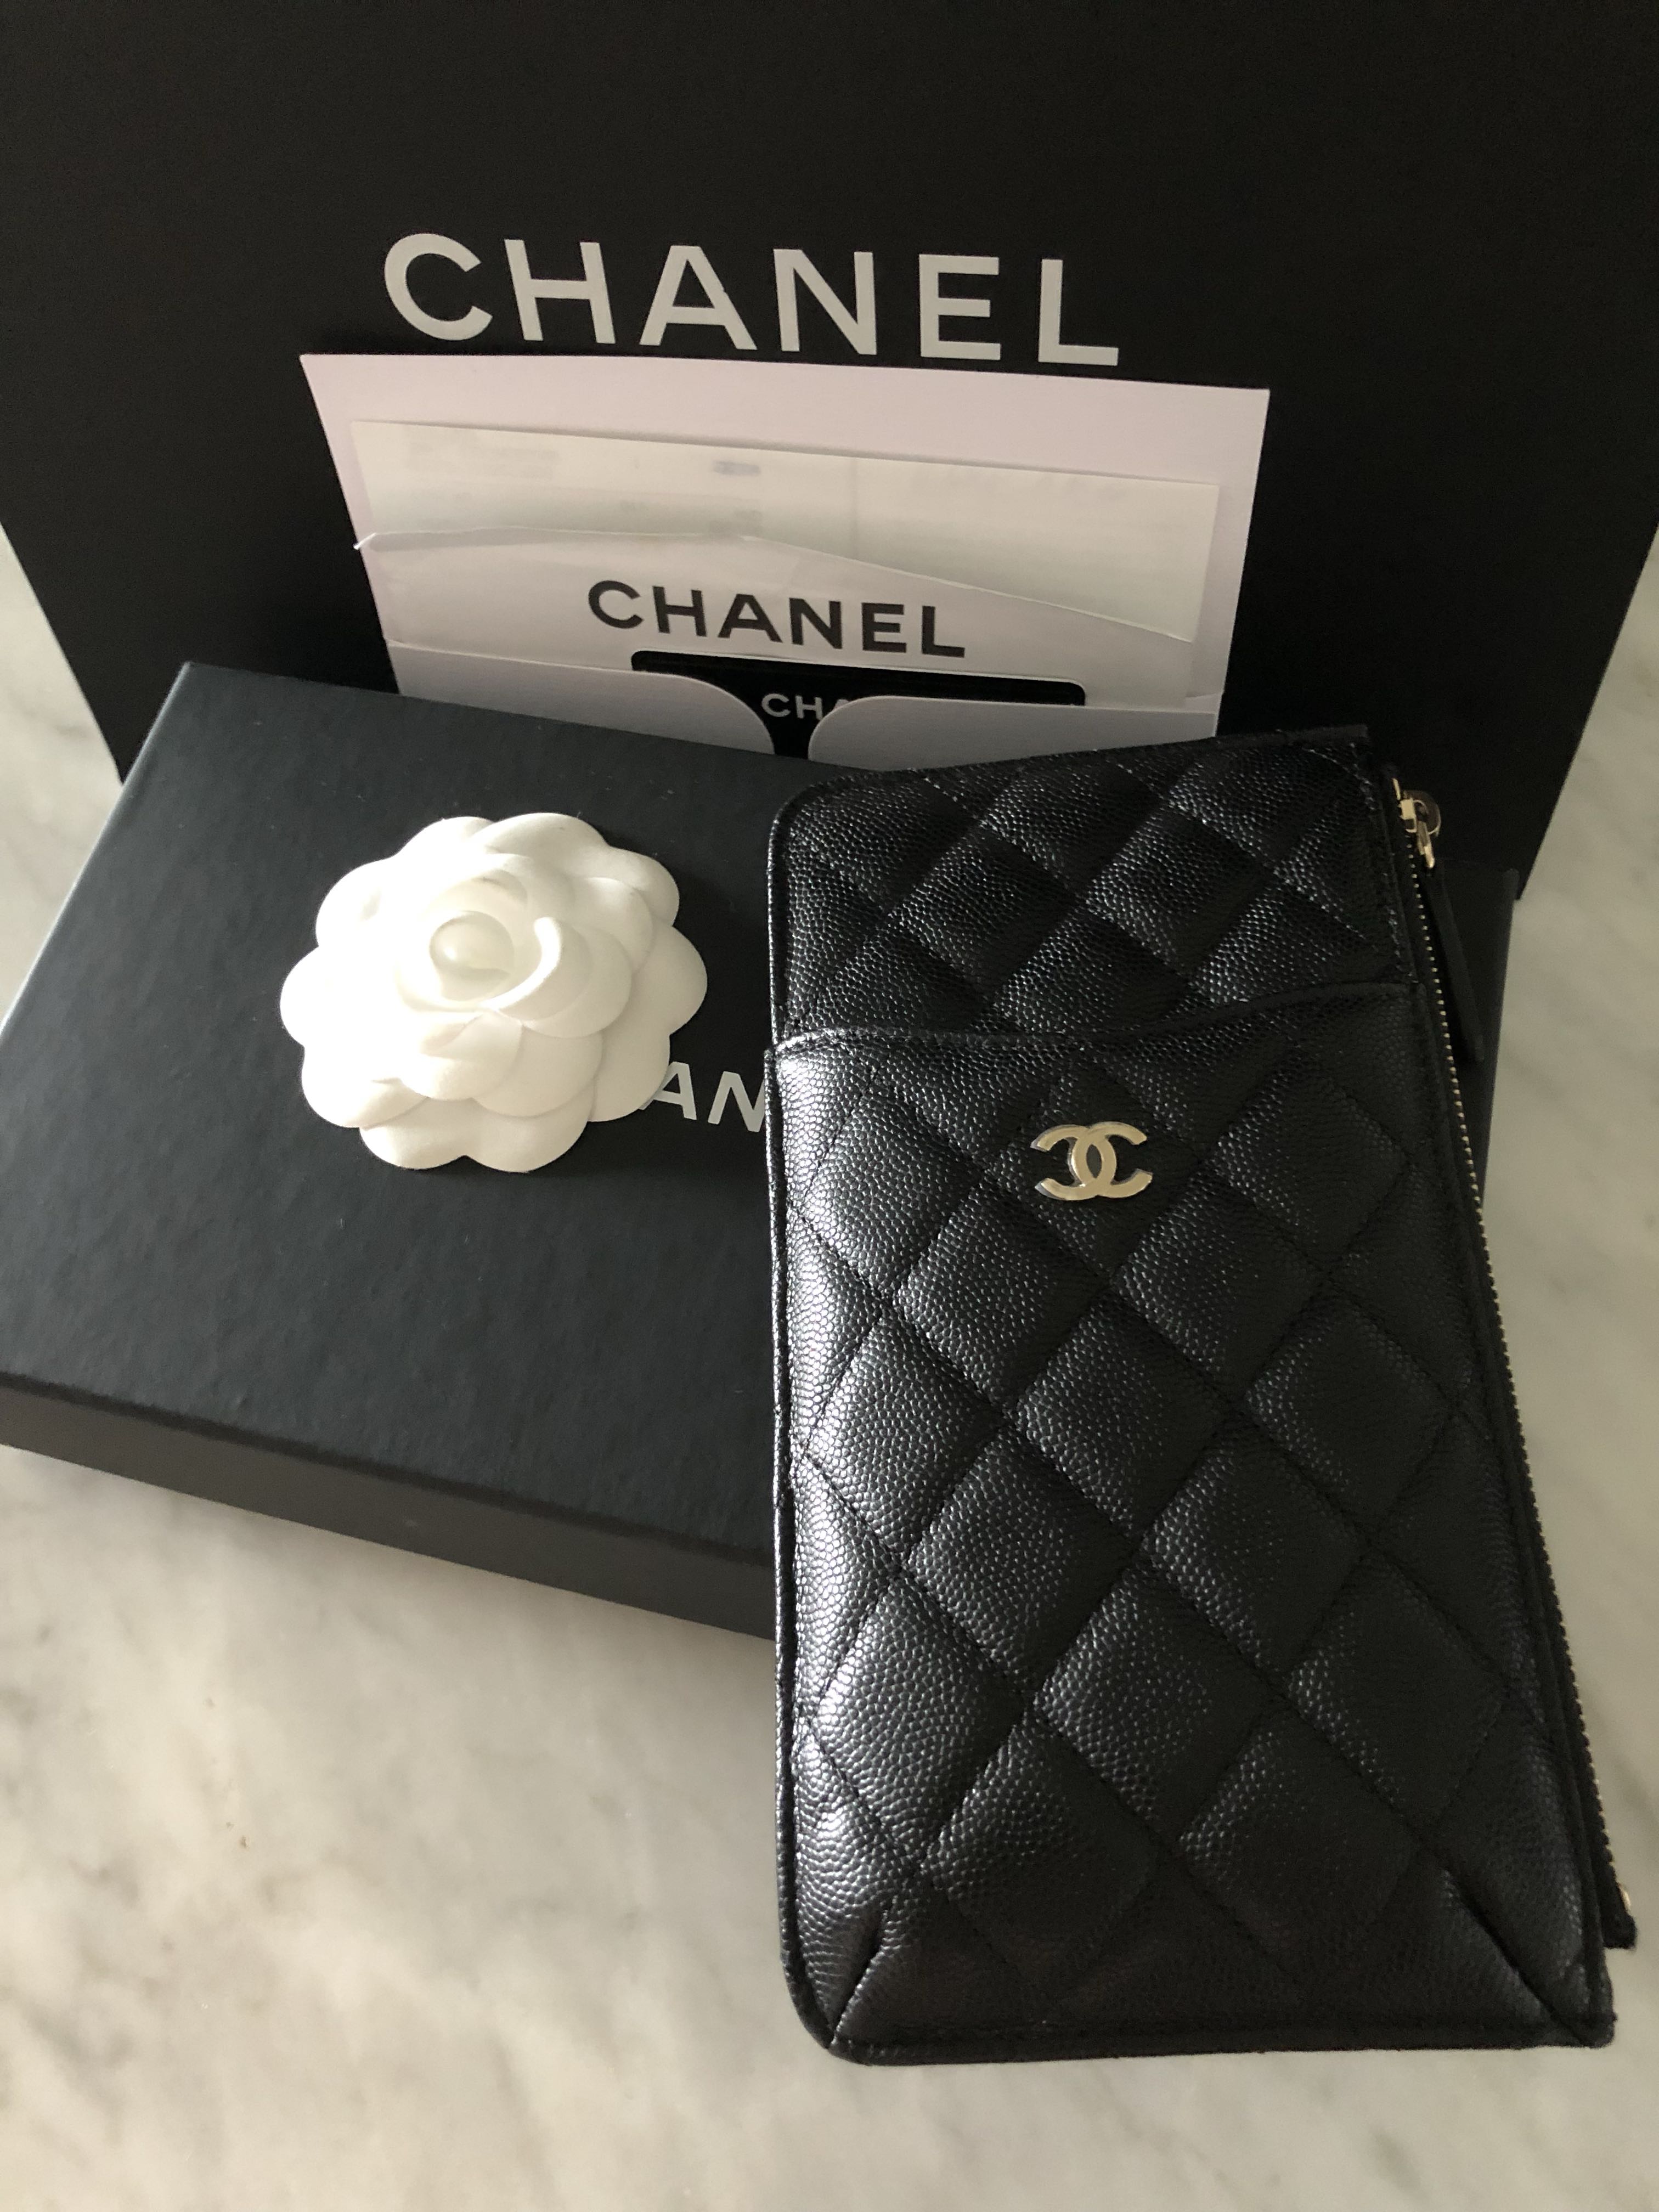 Authentic Chanel classic pouch, Fashion, & Wallets, Purses & Pouches on Carousell